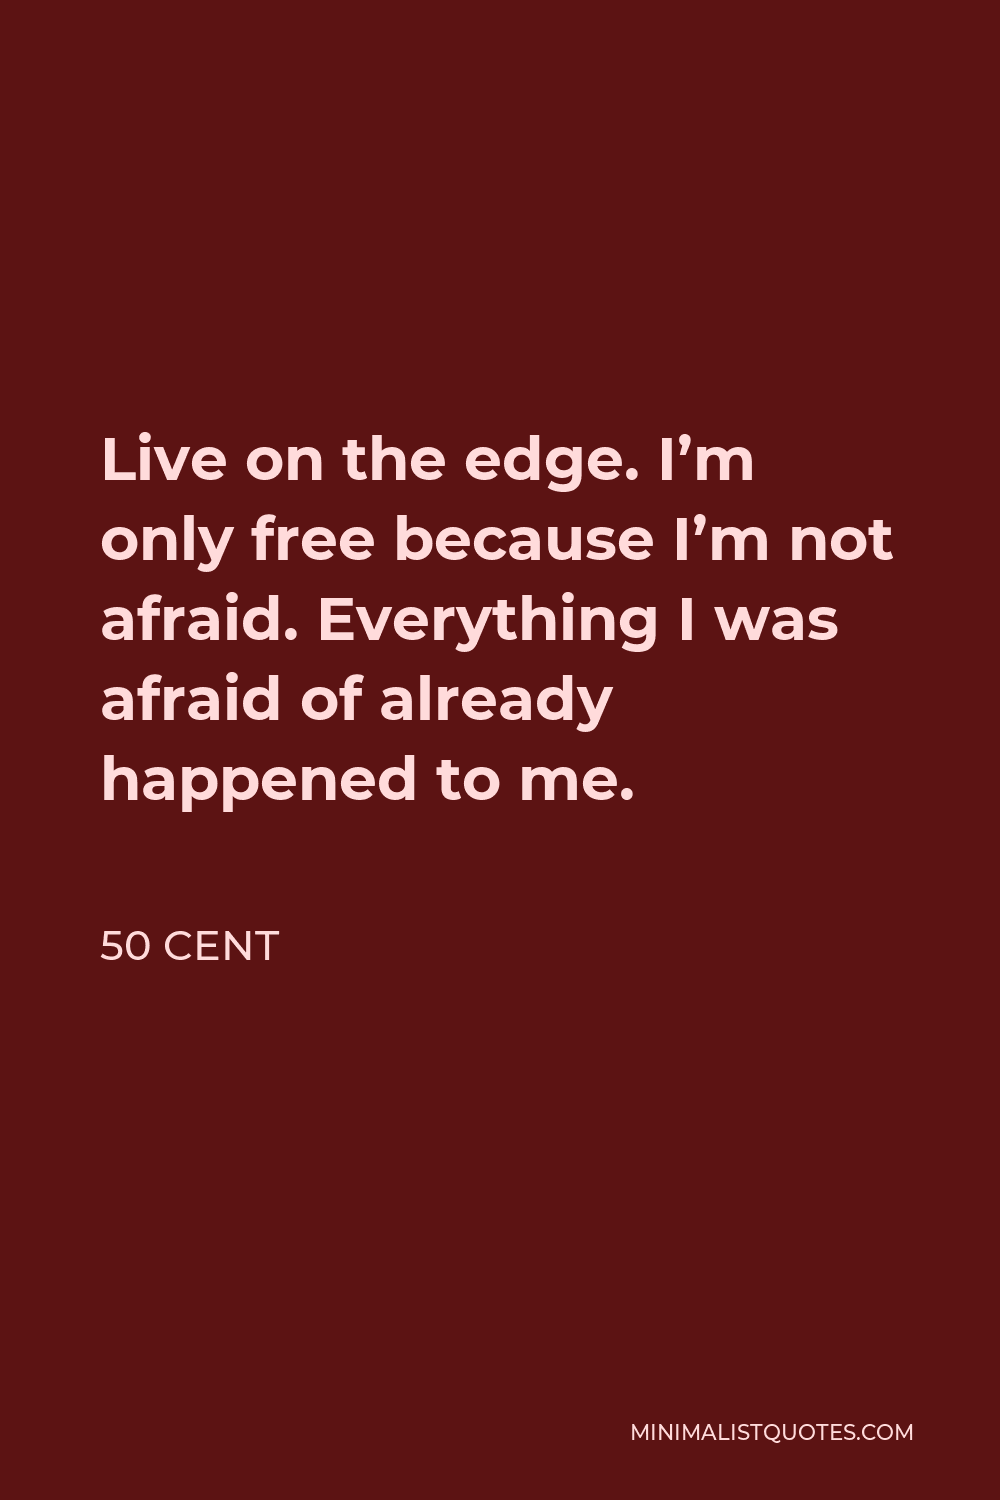 50 Cent Quote - Live on the edge. I’m only free because I’m not afraid. Everything I was afraid of already happened to me.